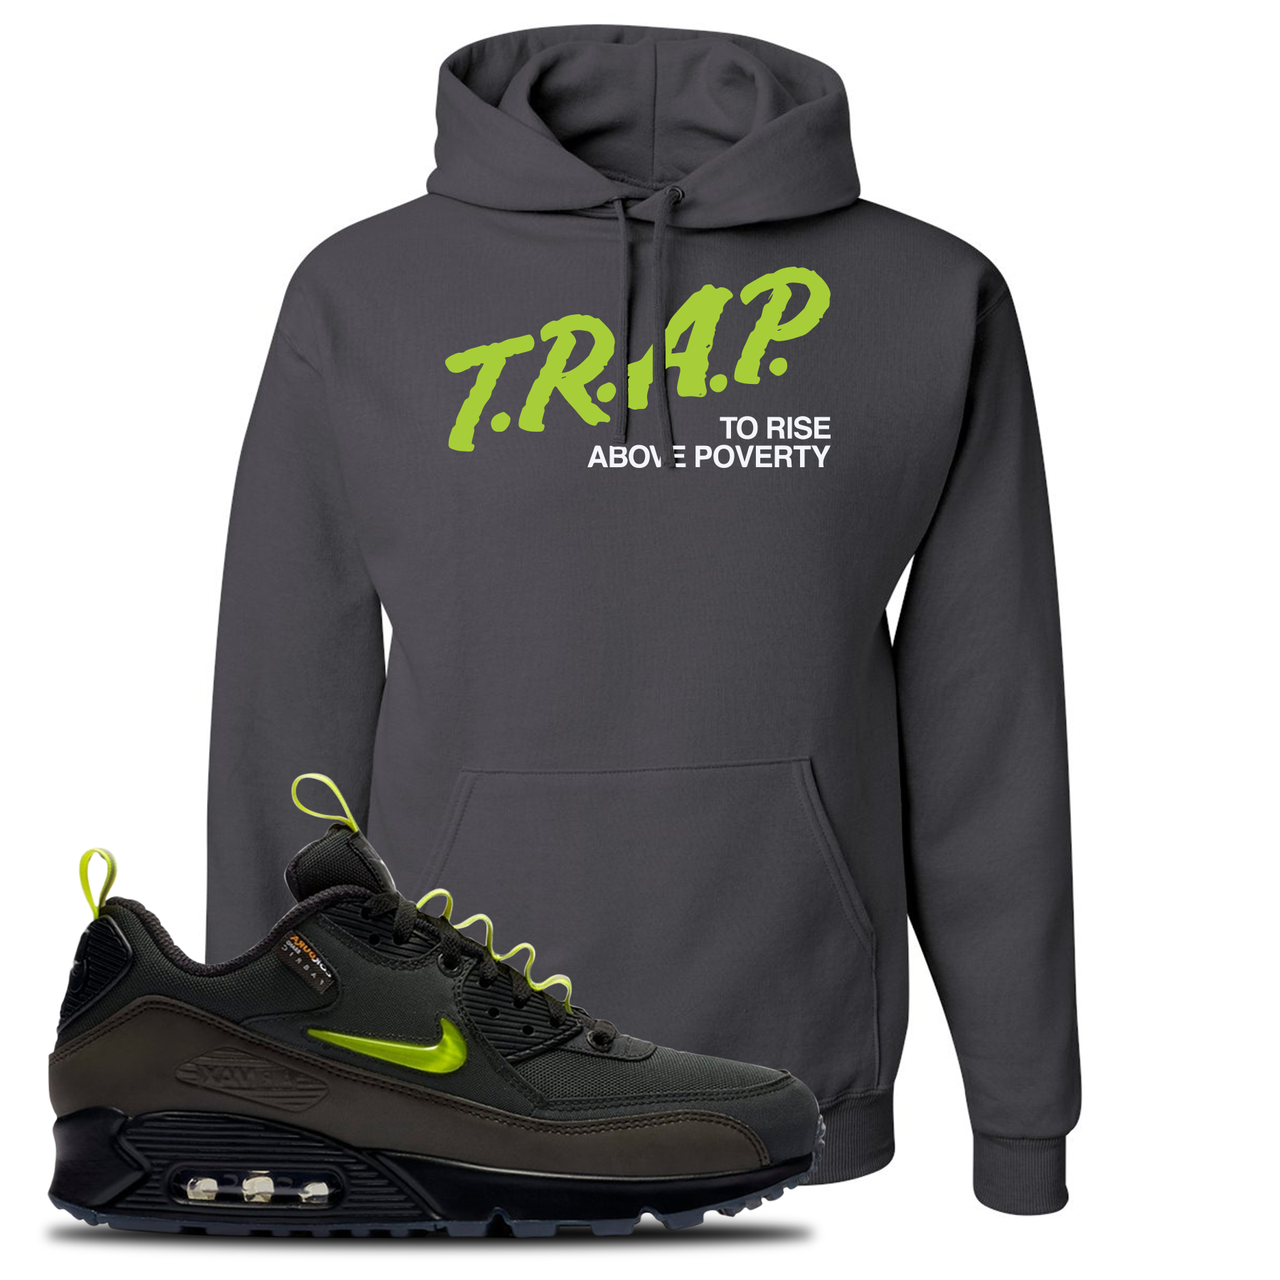 The Basement X Air Max 90 Manchester Trap to Rise Above Poverty Charcoal Gray Sneaker Hook Up Pullover Hoodie